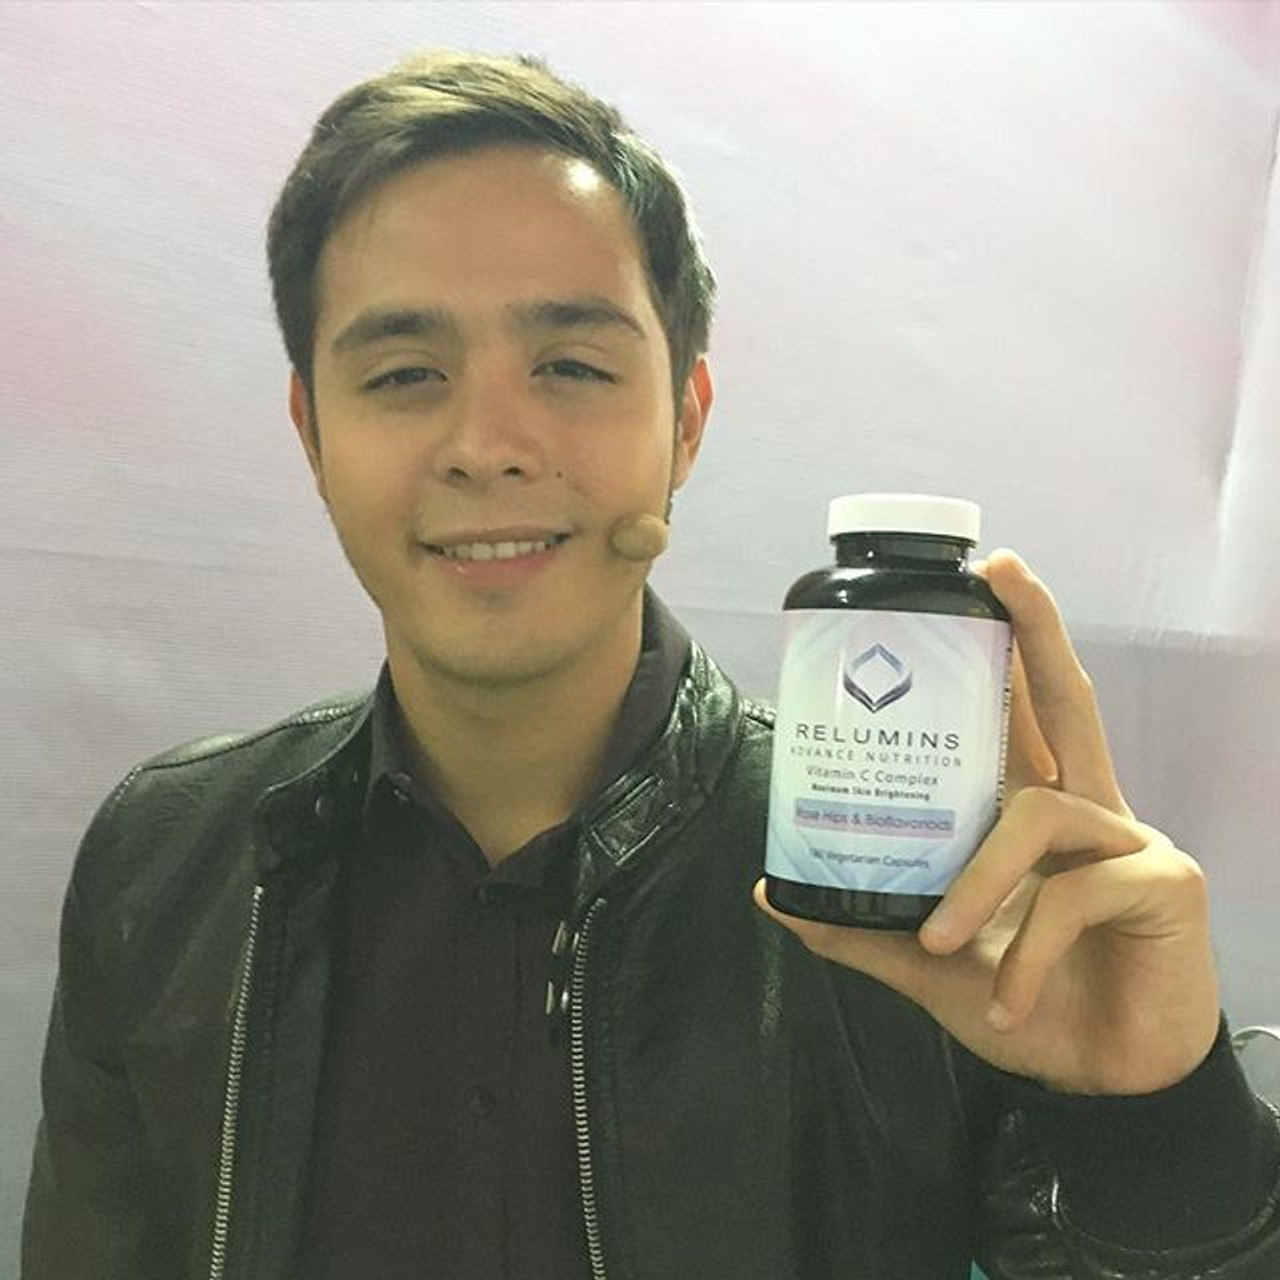 RELUMINS  ADVANCE NUTRITION 1000 Reduced L - Glutathione Skin Whitening with RELUMINS Vitamin C 60 Capsules